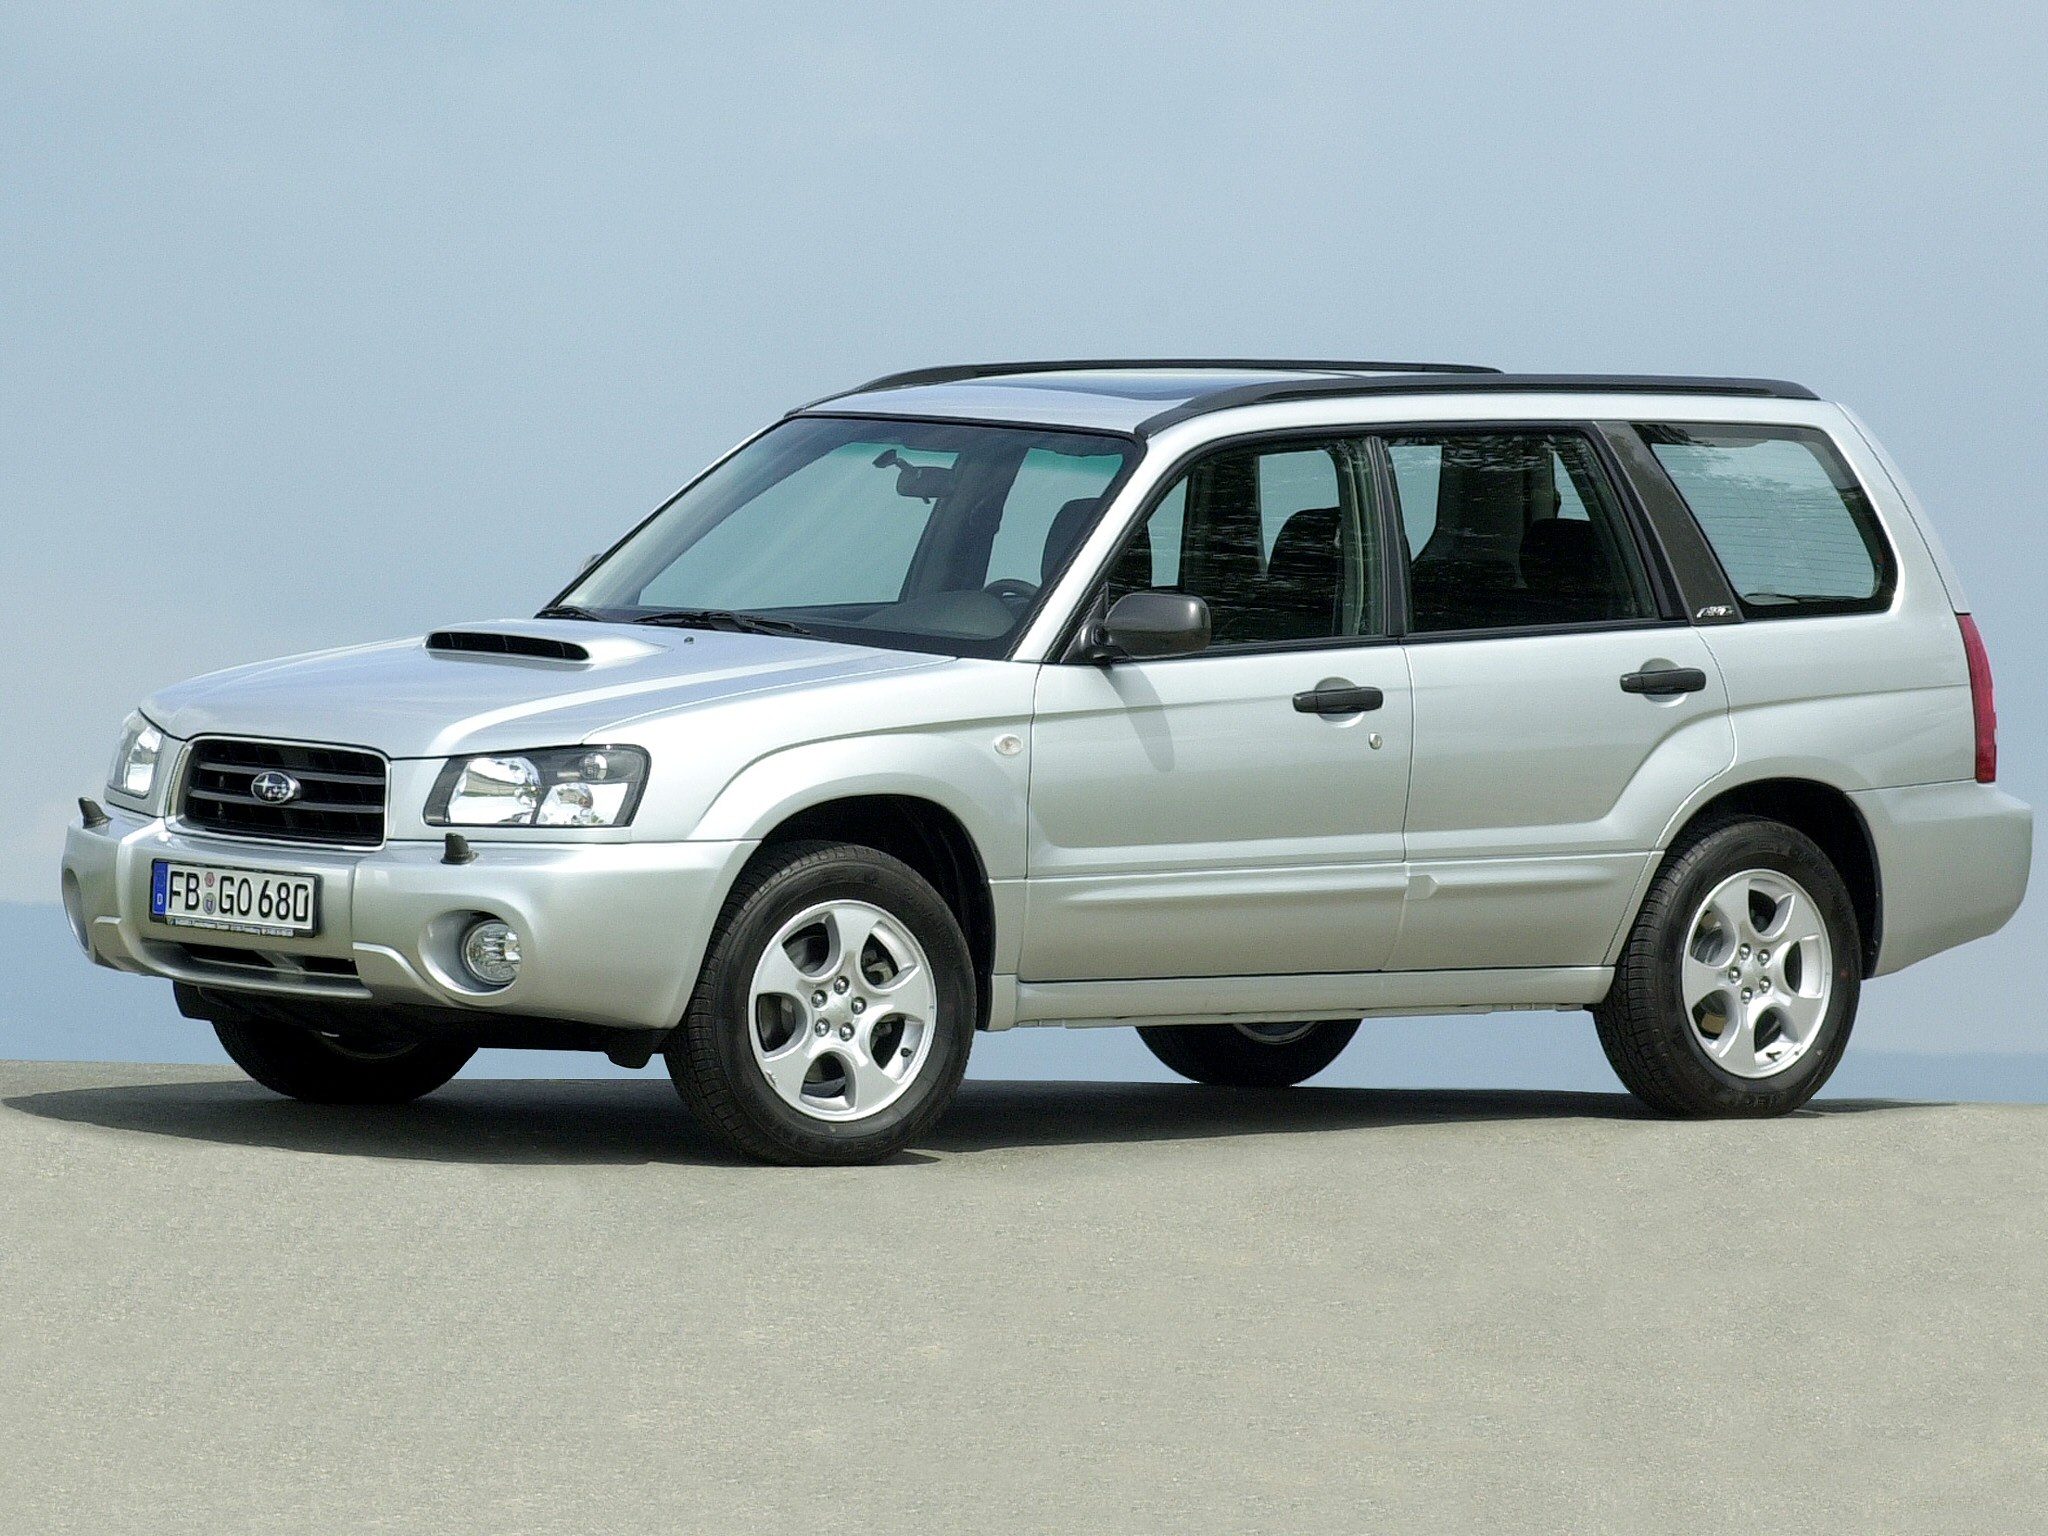 Car in pictures car photo gallery » Subaru Forester 2003